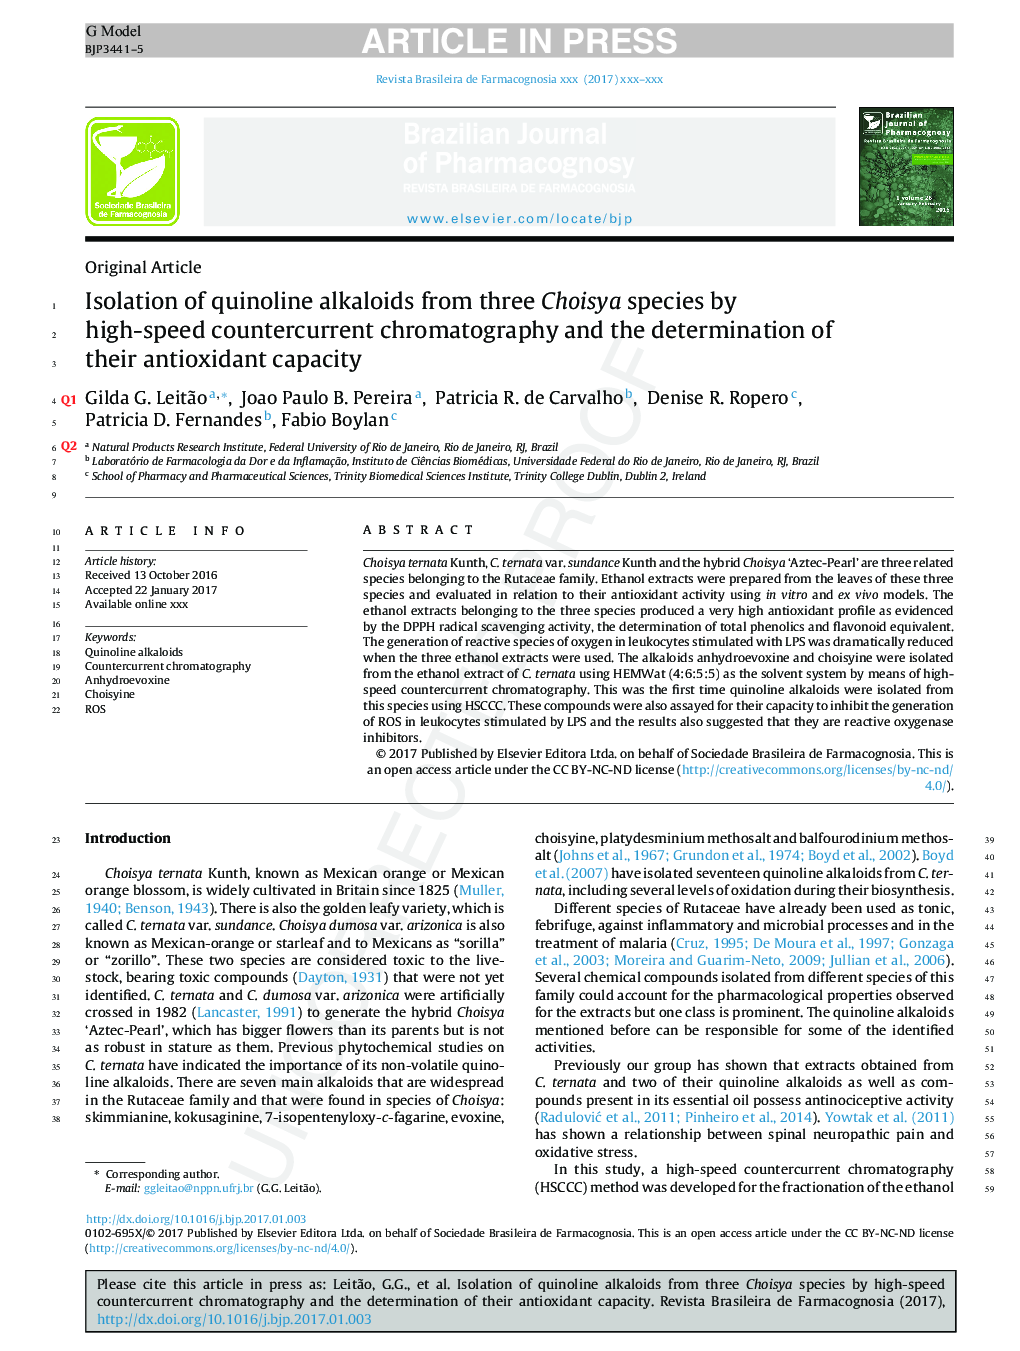 Isolation of quinoline alkaloids from three Choisya species by high-speed countercurrent chromatography and the determination of their antioxidant capacity